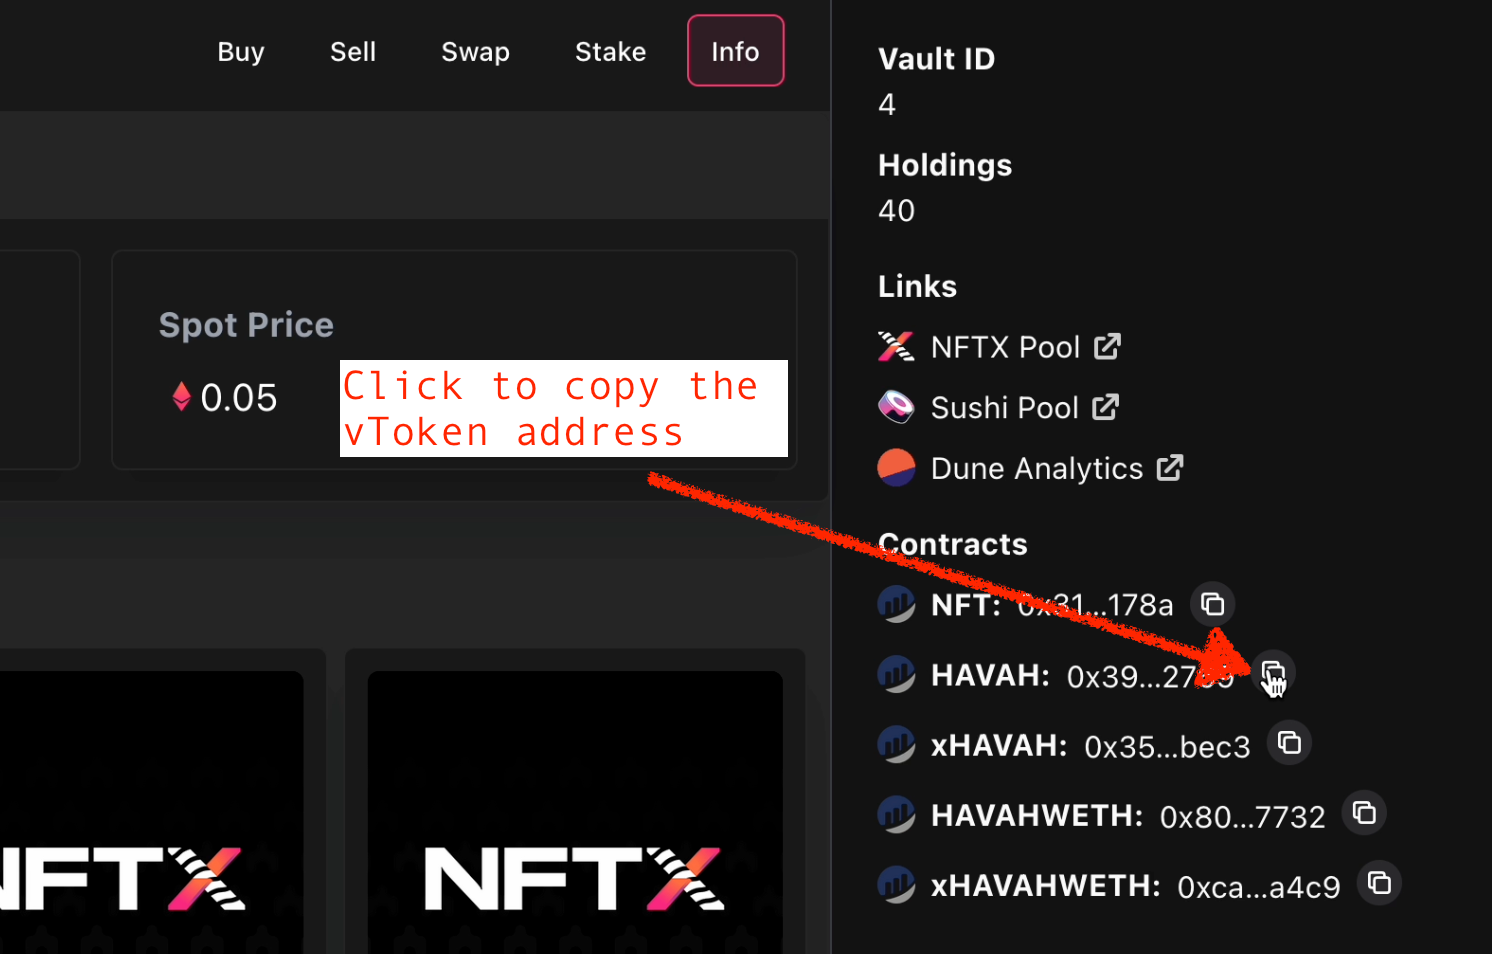 Creating concentrated liquidity positions on NFTX with Uniswap V3 - Goerli Testnet